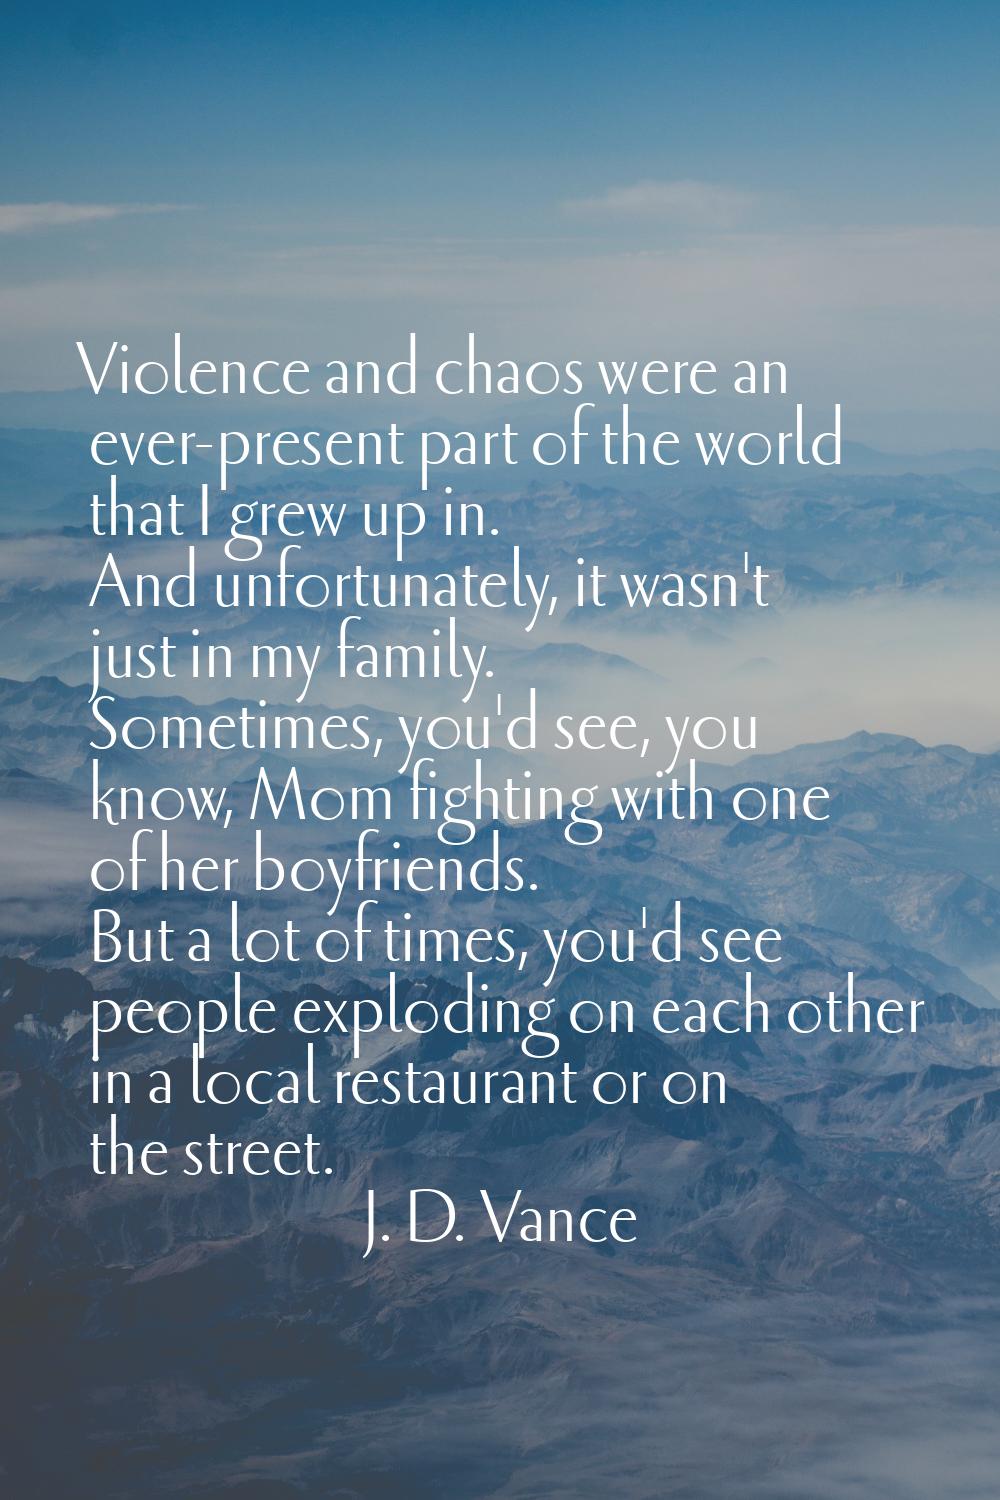 Violence and chaos were an ever-present part of the world that I grew up in. And unfortunately, it 